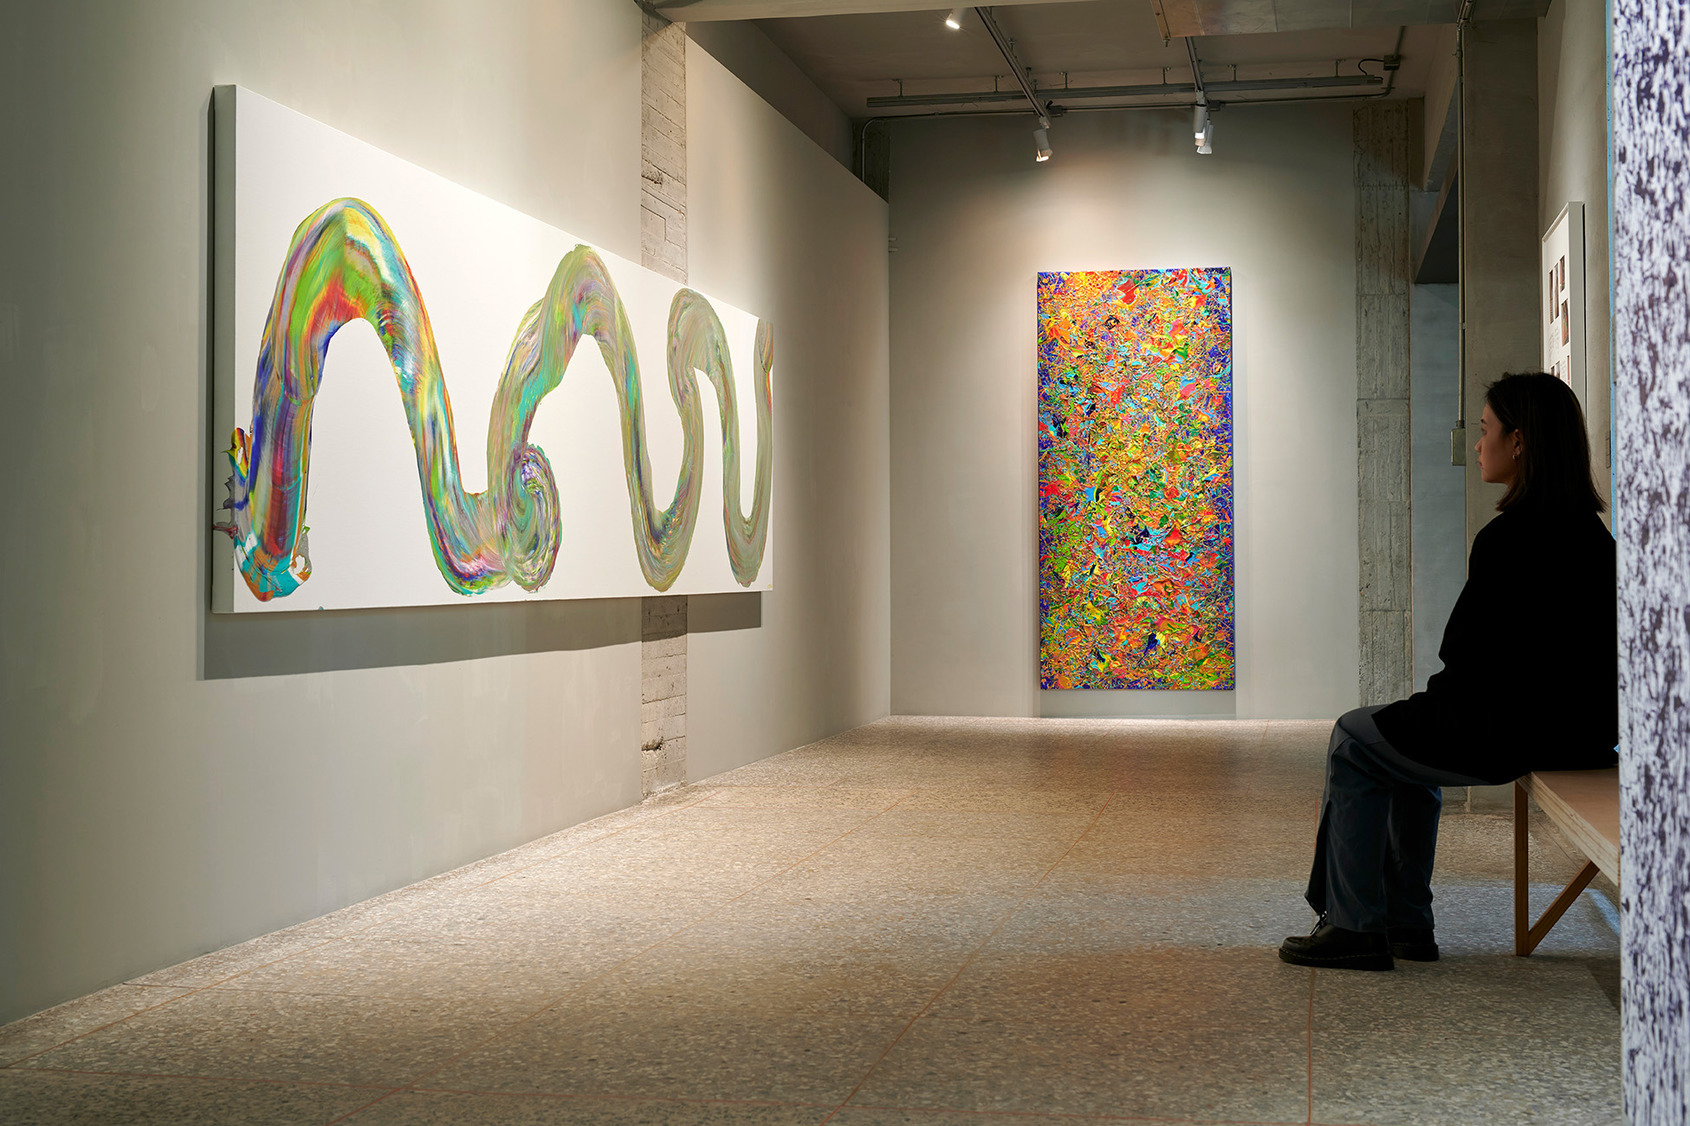 The installation view of Yungtien Shao's The River of Life (left) and Circle of Life (right) at ALIEN Art Centre © ALIEN Art Centre 